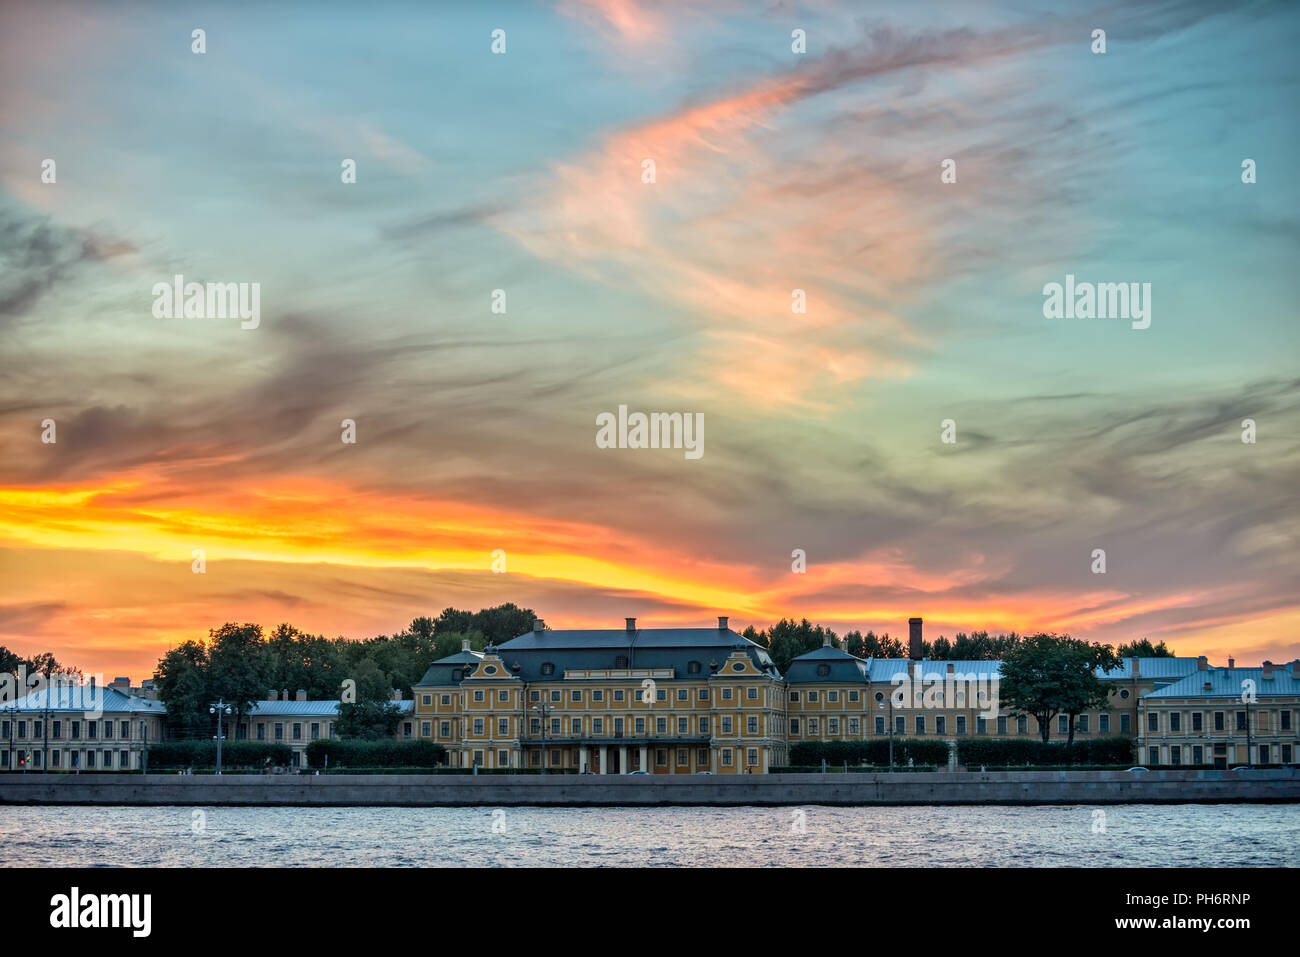 Menshikov Palace in St. Petersburg. Russia Stock Photo